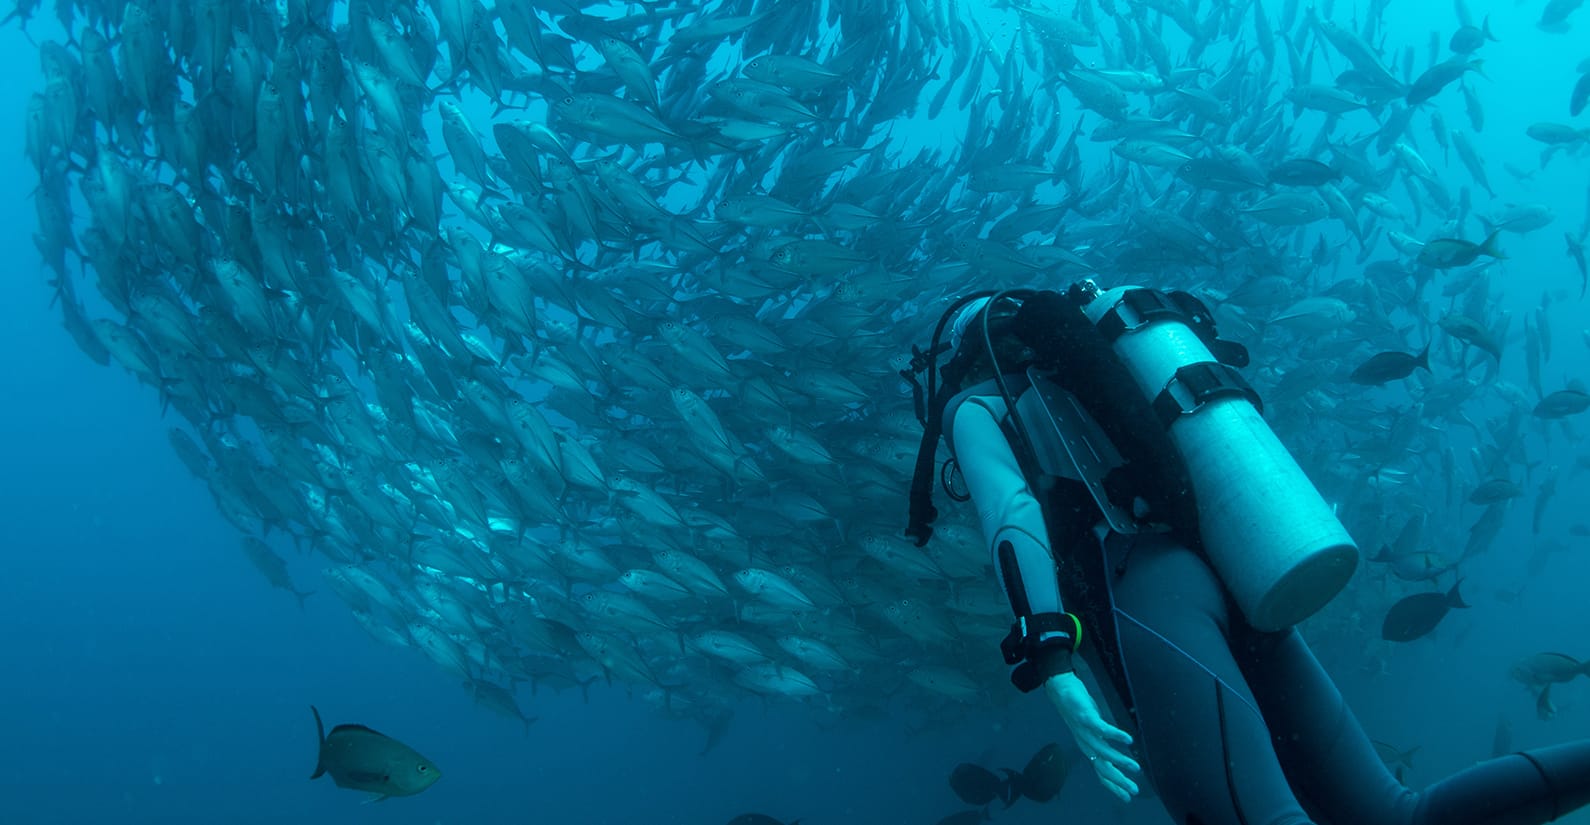 Diver among a school of fish